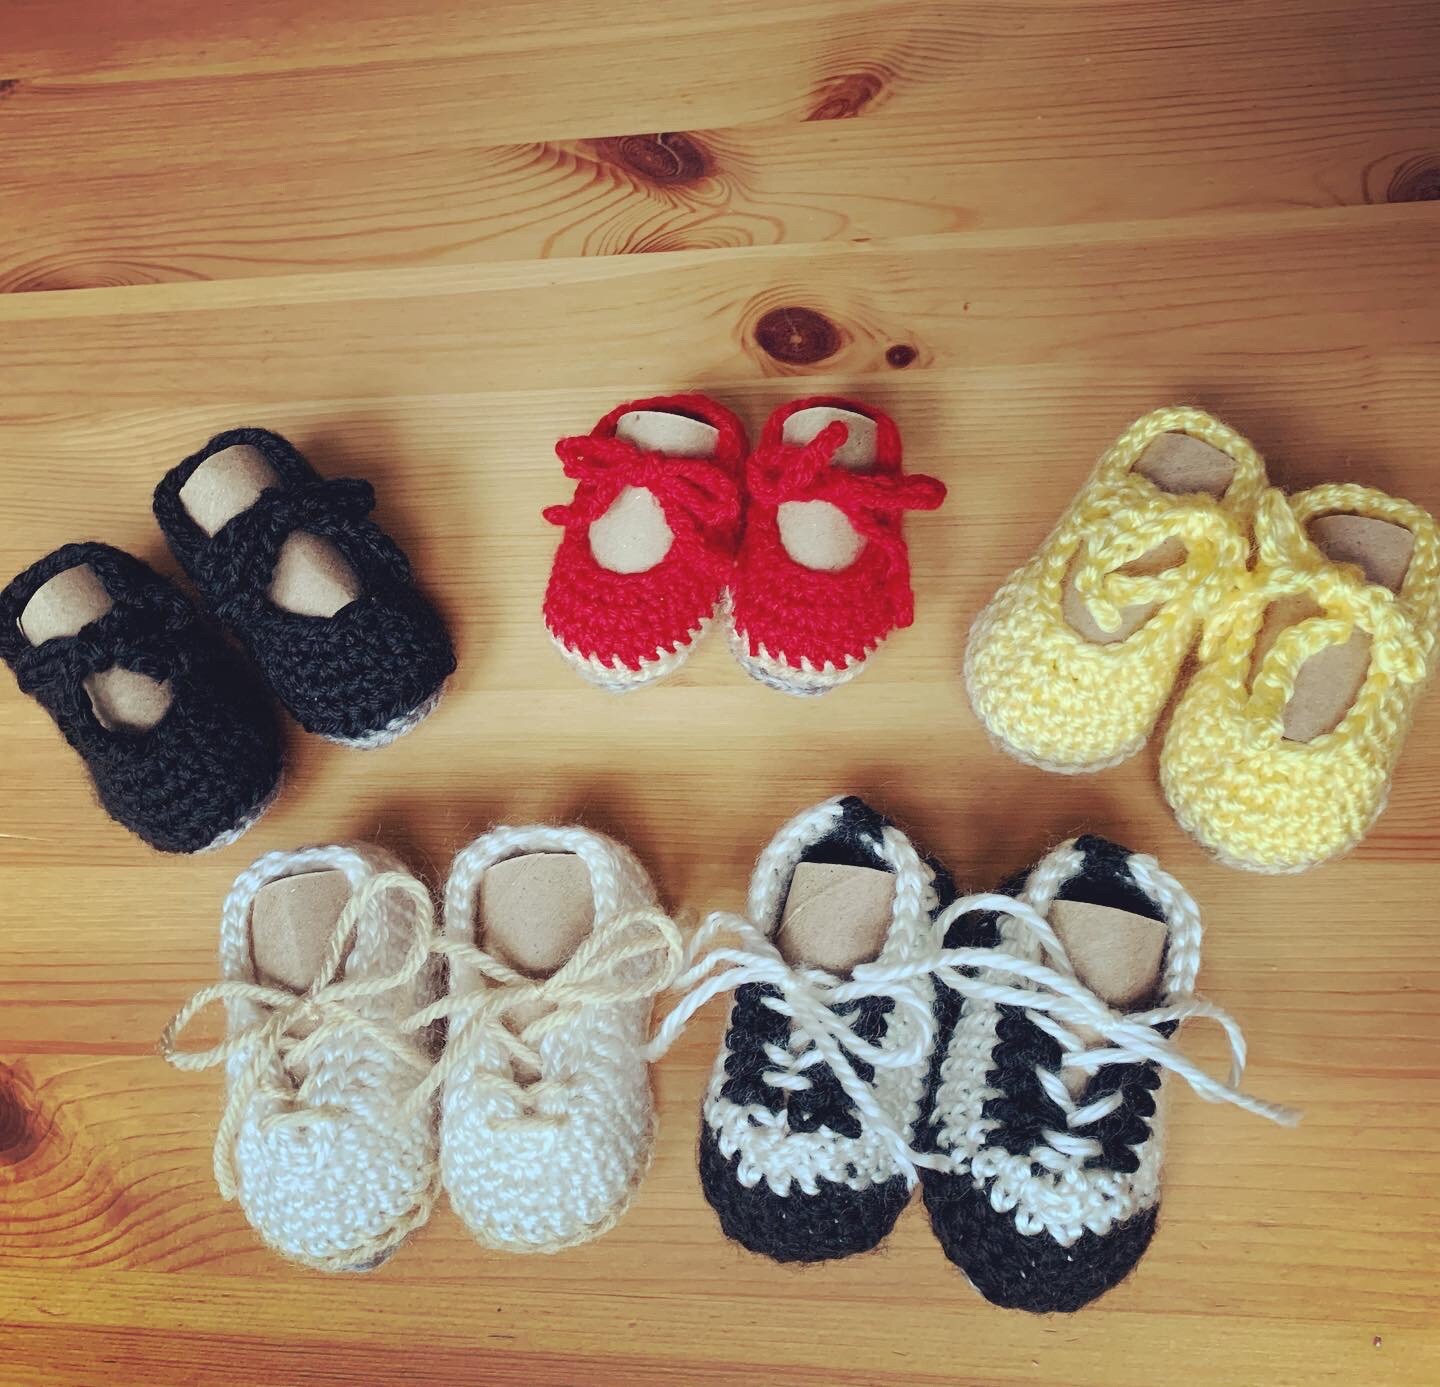 crochet baby Sneakers Baby summer shoes,baby dance shoes Schoenen Meisjesschoenen Dansschoenen 